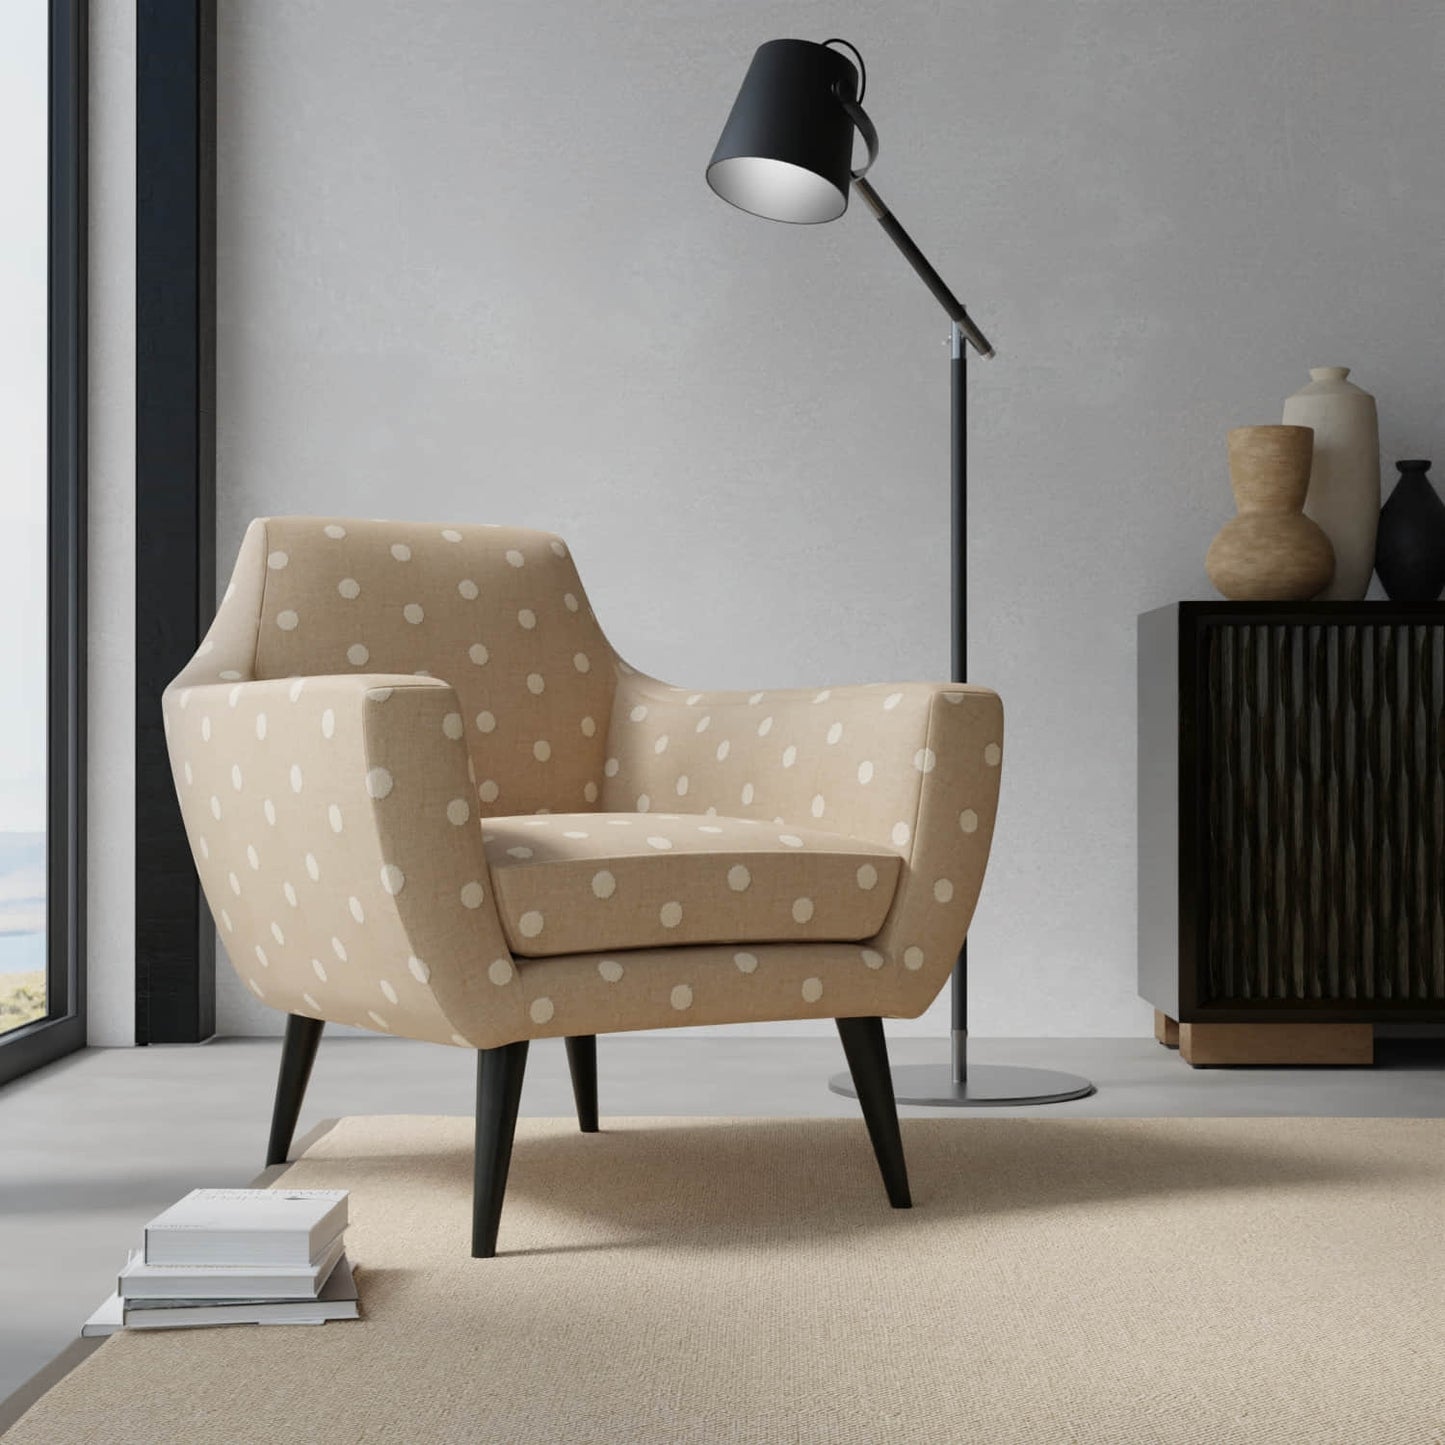 Whitney Raffia upholstered on a contemporary chair